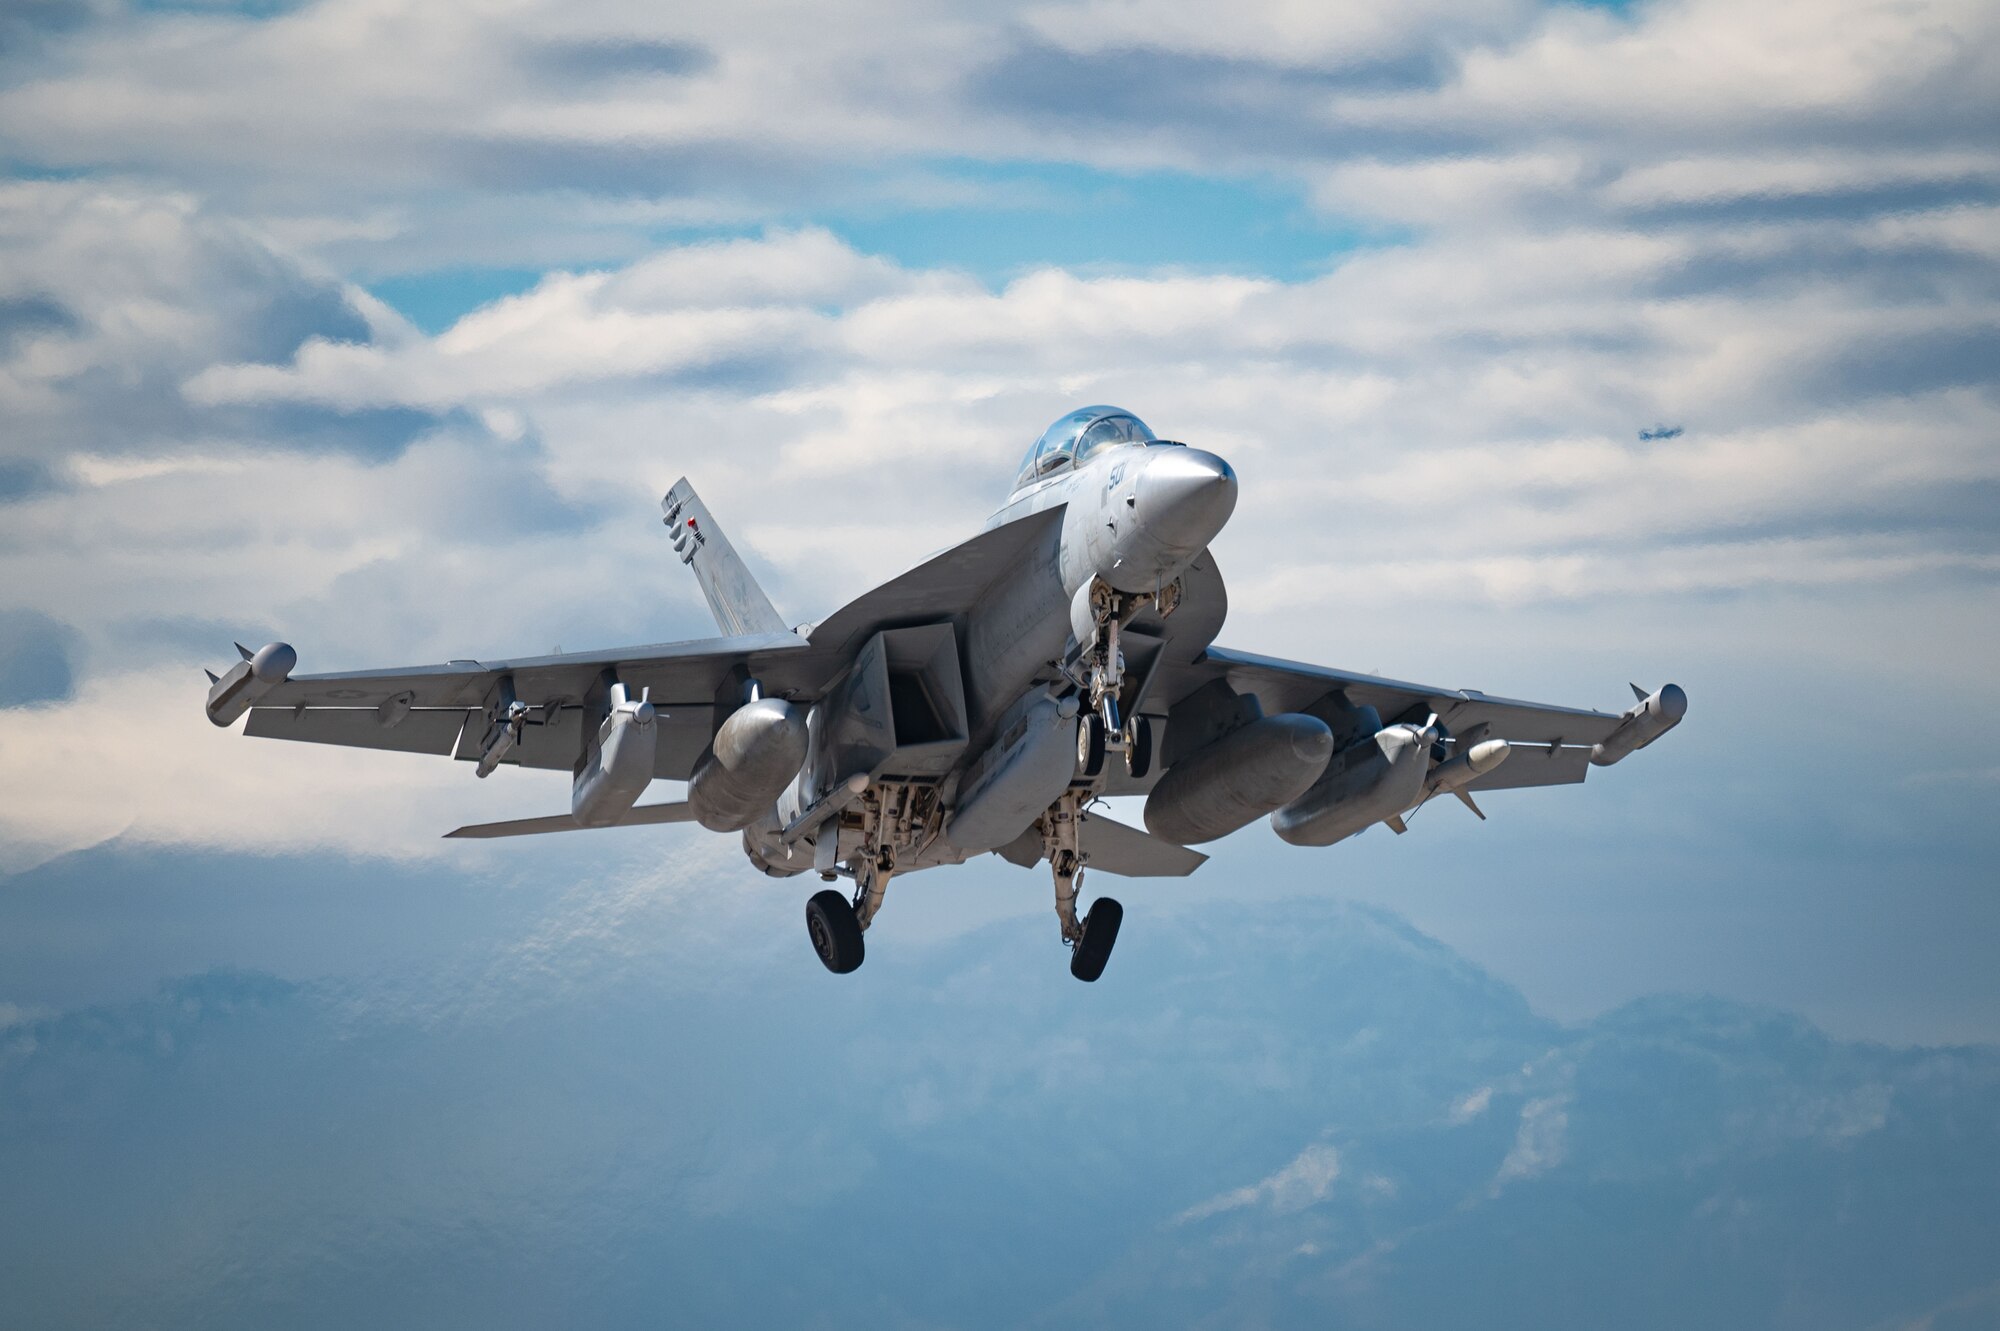 A U.S. Navy EA-18G Growler assigned to Electronic Attack Squadron 135 at Naval Air Station Whidbey Island, Washington, takes-off prior to the start of Red Flag 23-1 at Nellis Air Force Base, Nev., Jan 19, 2023.